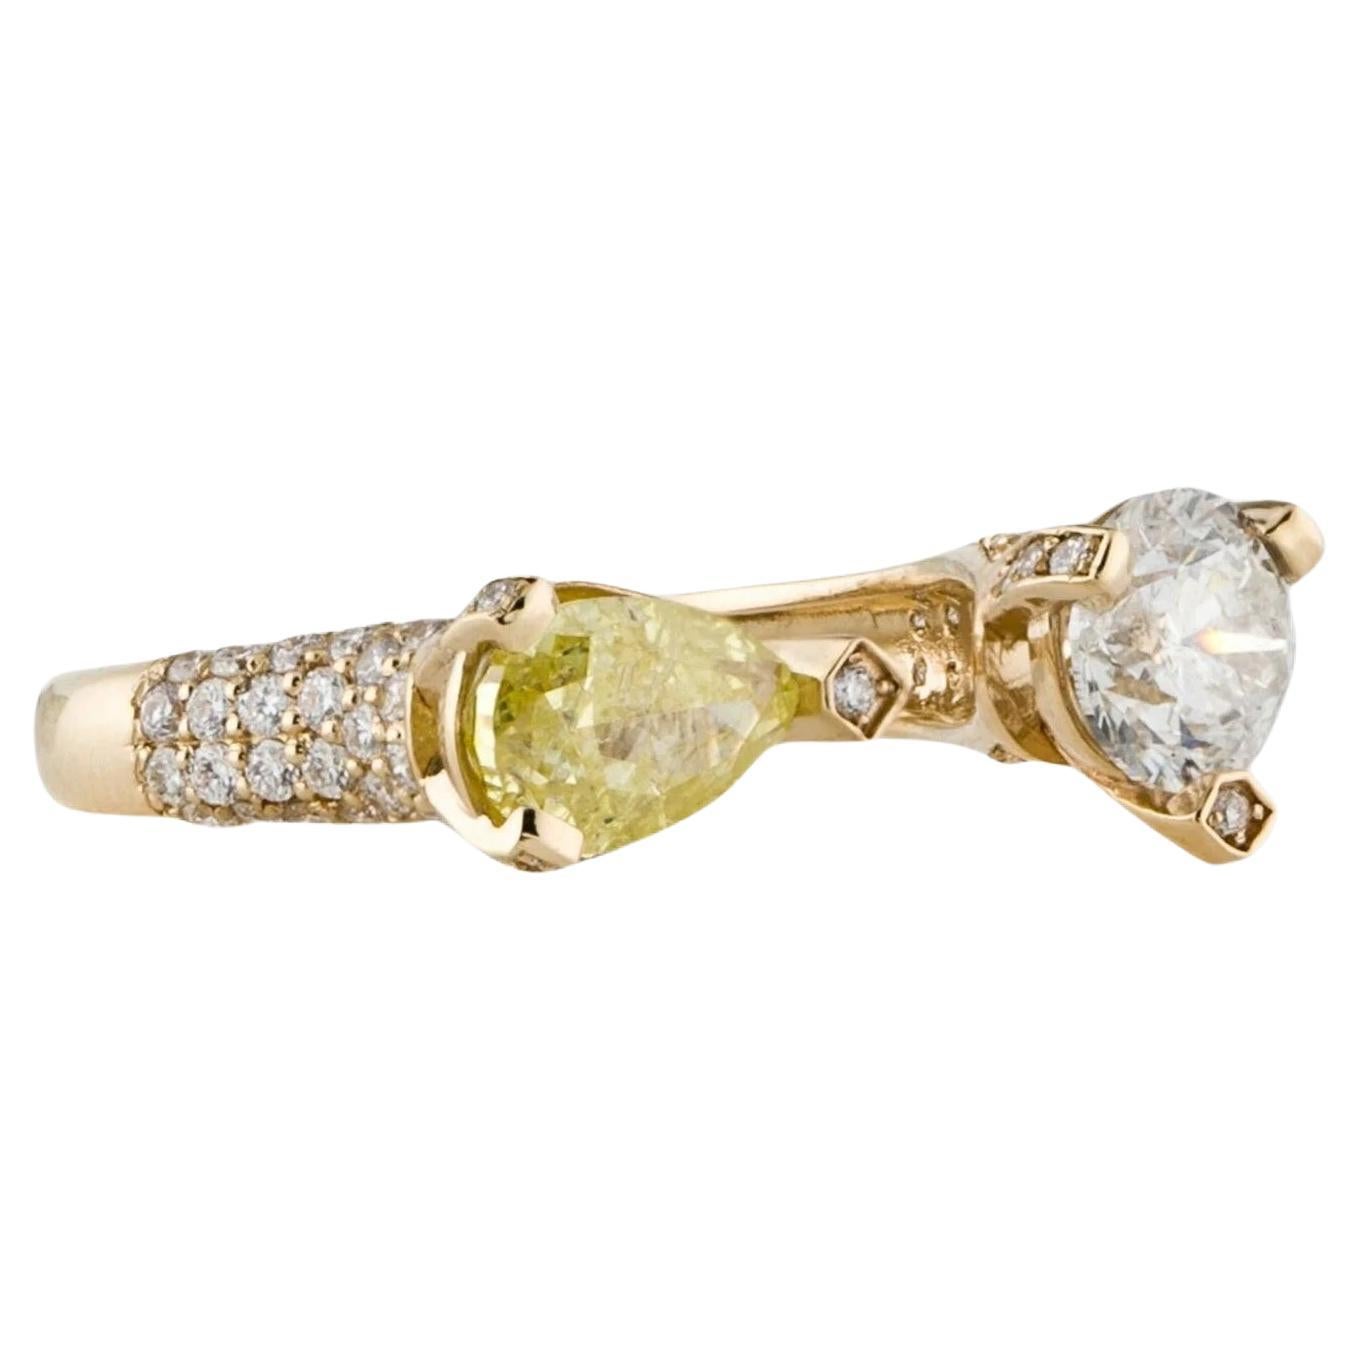 Toi et Moi Bypass Diamond Ring 1 Ct Fancy Intense Yellow PS & 1.03 Ct H Round For Sale